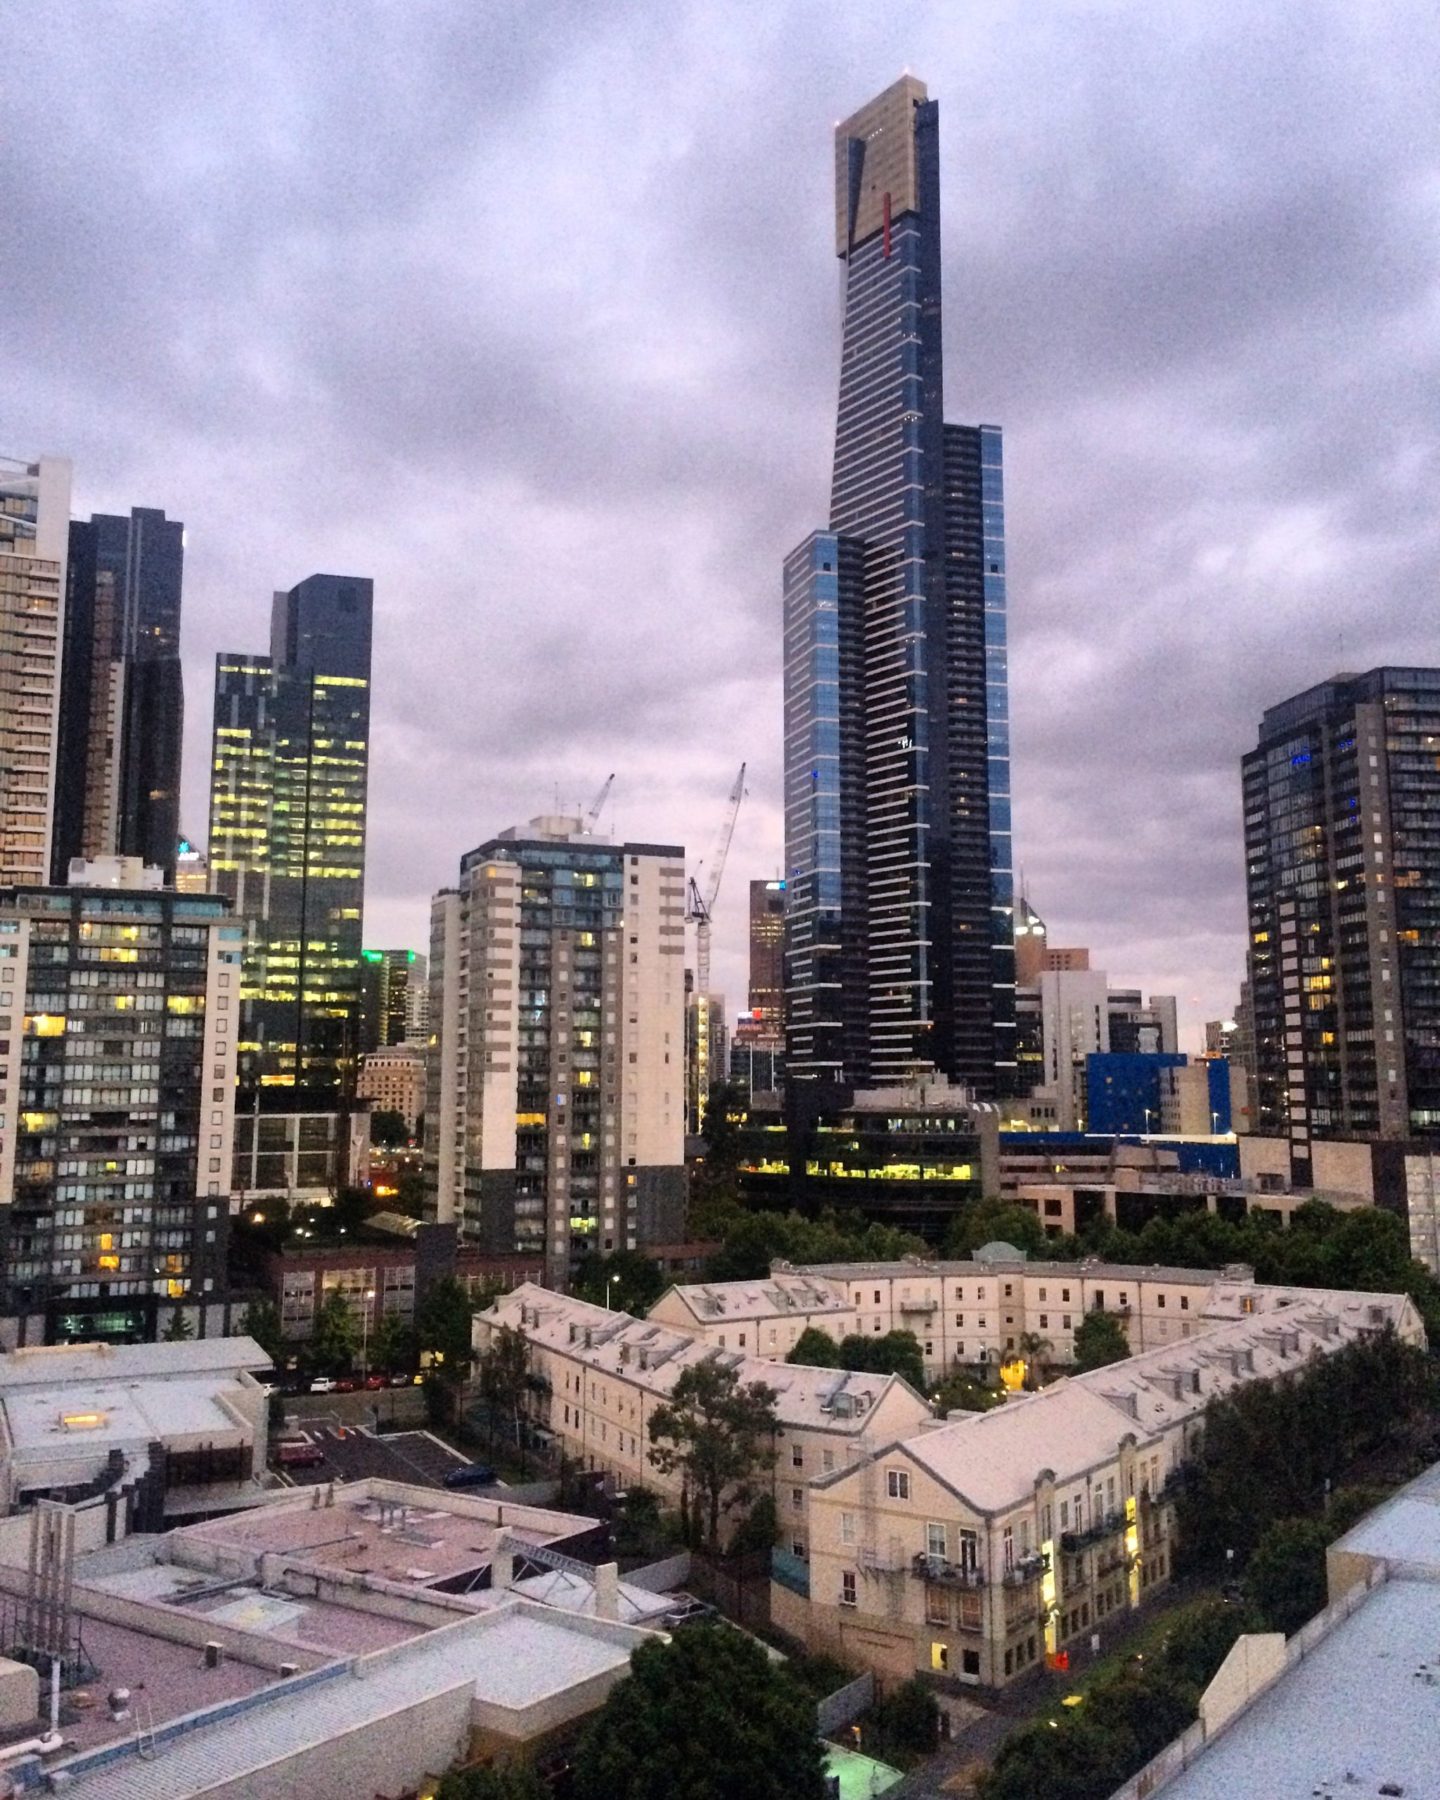 Guide to My Favorite City: Melbourne